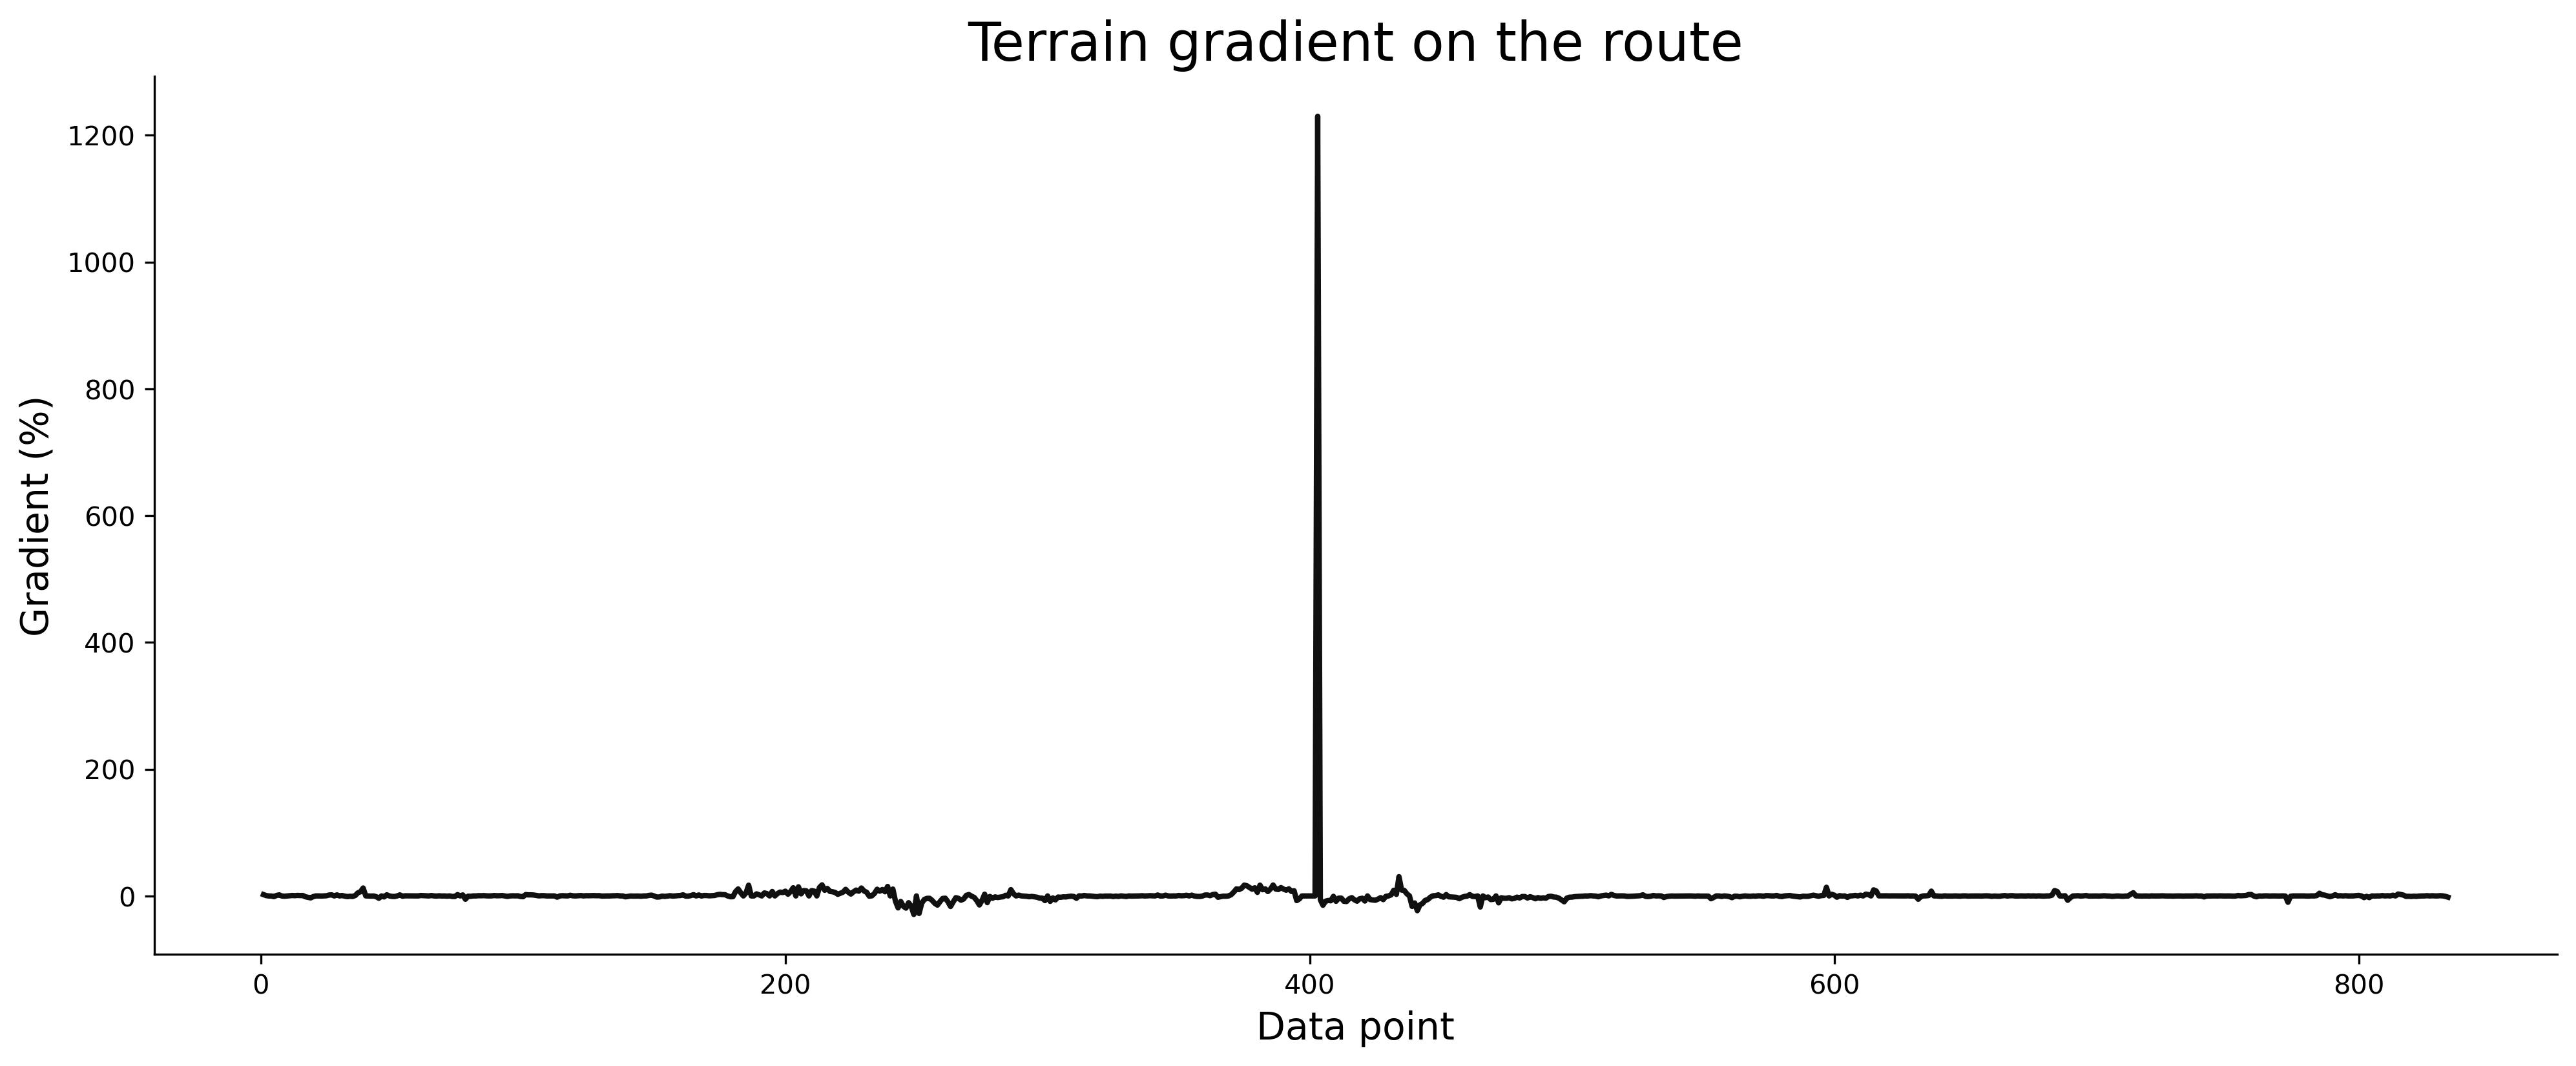 Image 3 - Estimated average route gradient v1 (image by author)